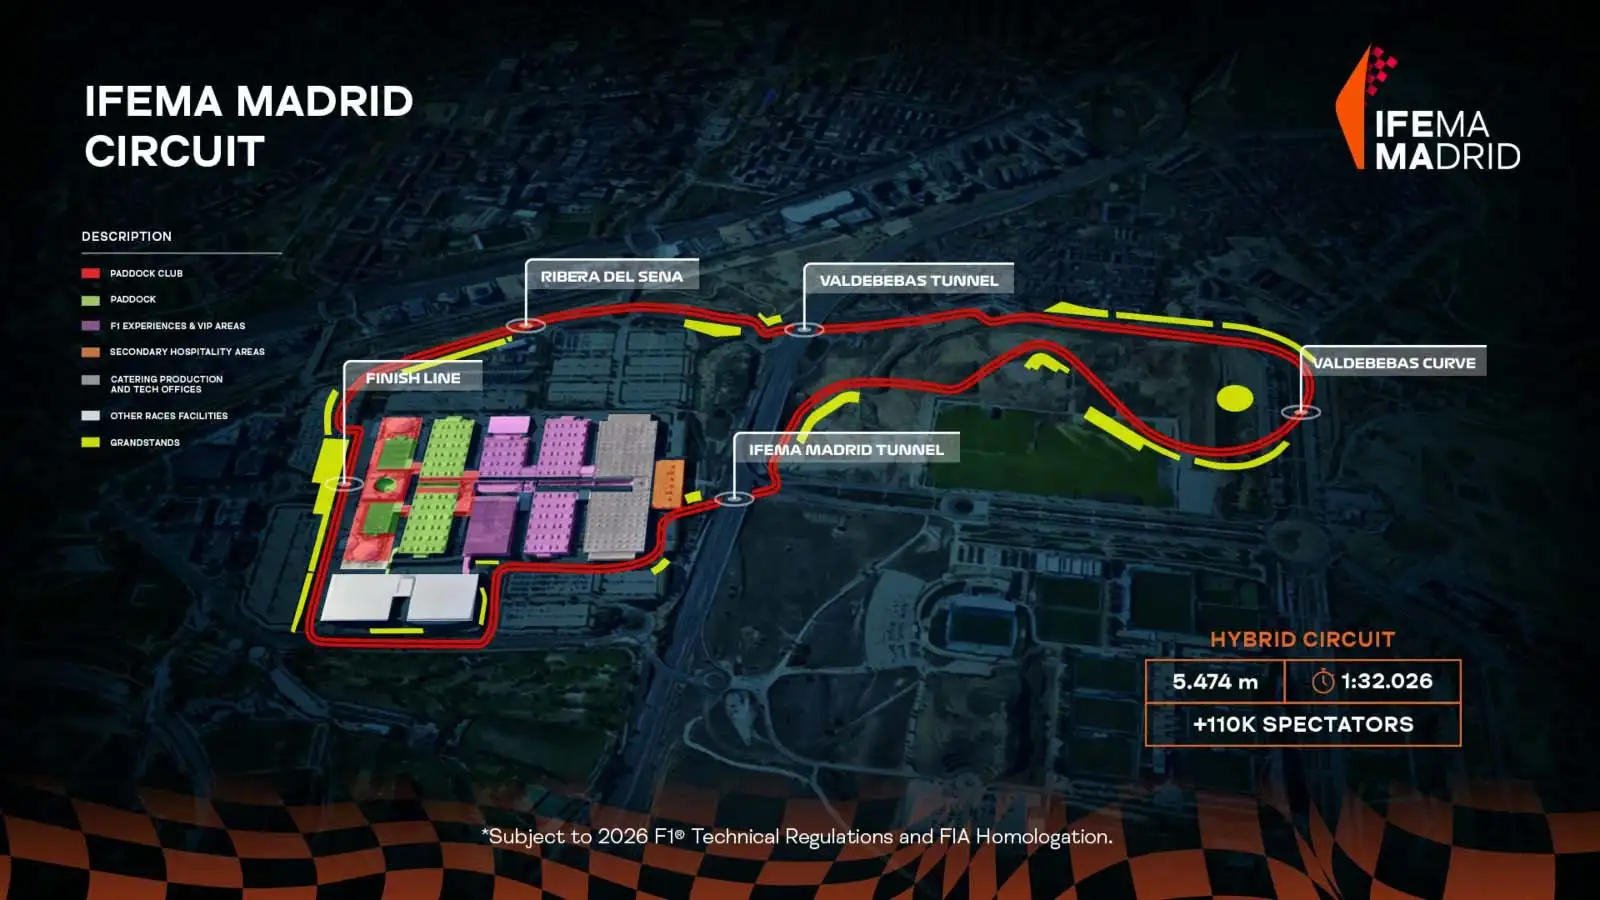 The track map of the new Madrid circuit, host of the Spanish Grand Prix from 2026.